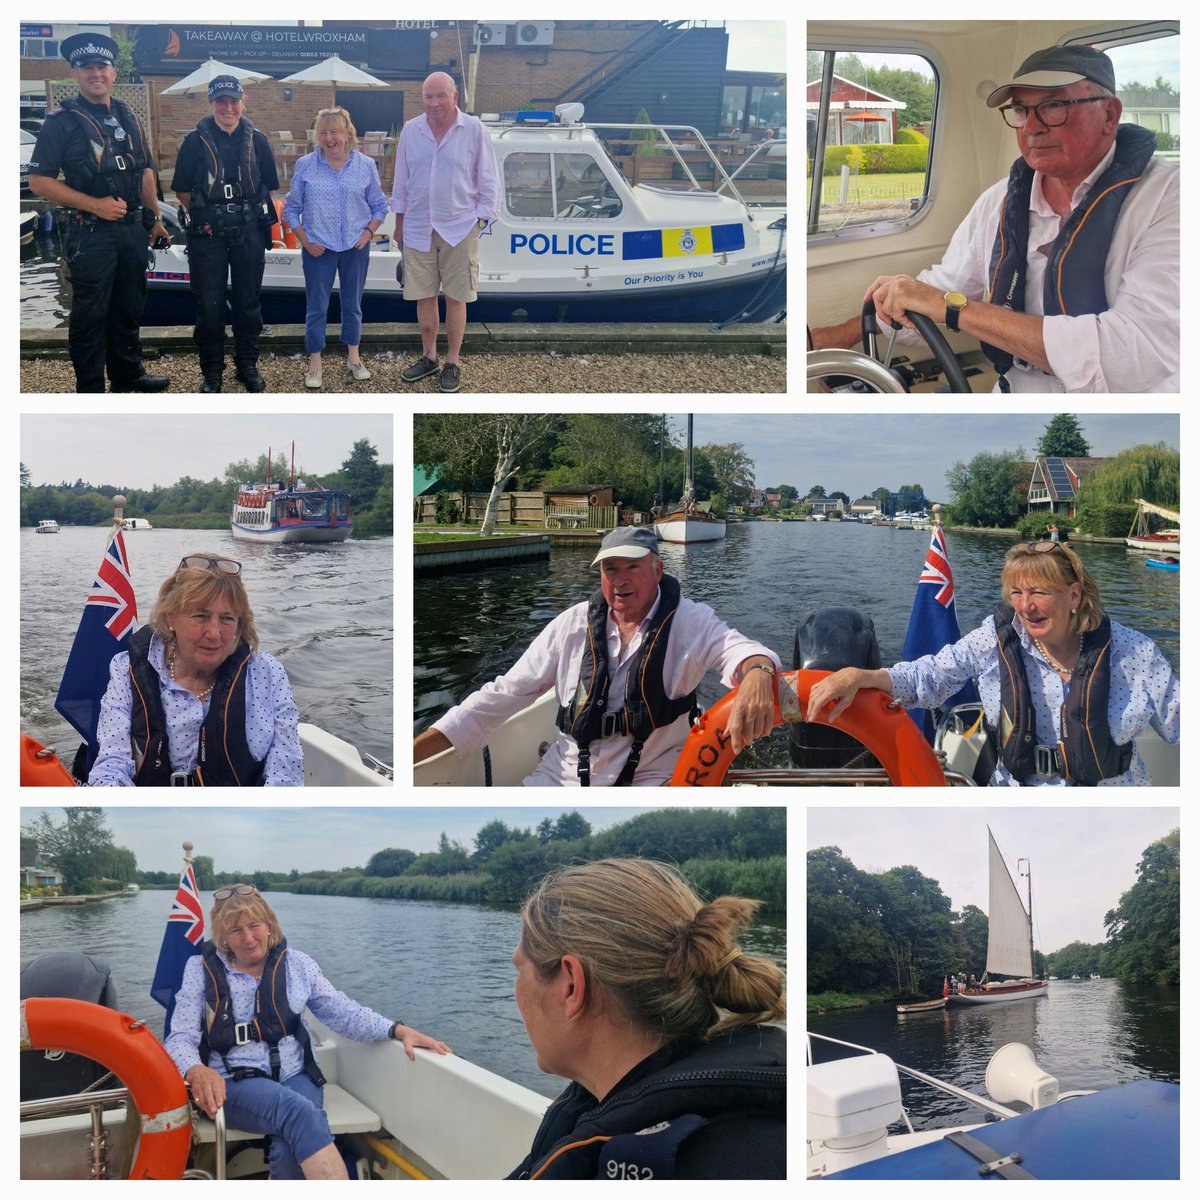 What a privilege! 
Lord & Lady Dannatt joined us on patrol along the busy River Bure to see & hear about our role, Policing the #Norfolk Broads ☀️⚓️👮‍♂️
Paul & Sarah @NorfolkPolice
#VisiblePolicing 
#CommunityEngagement 
@BroadlandPolice @NorthNorfPolice